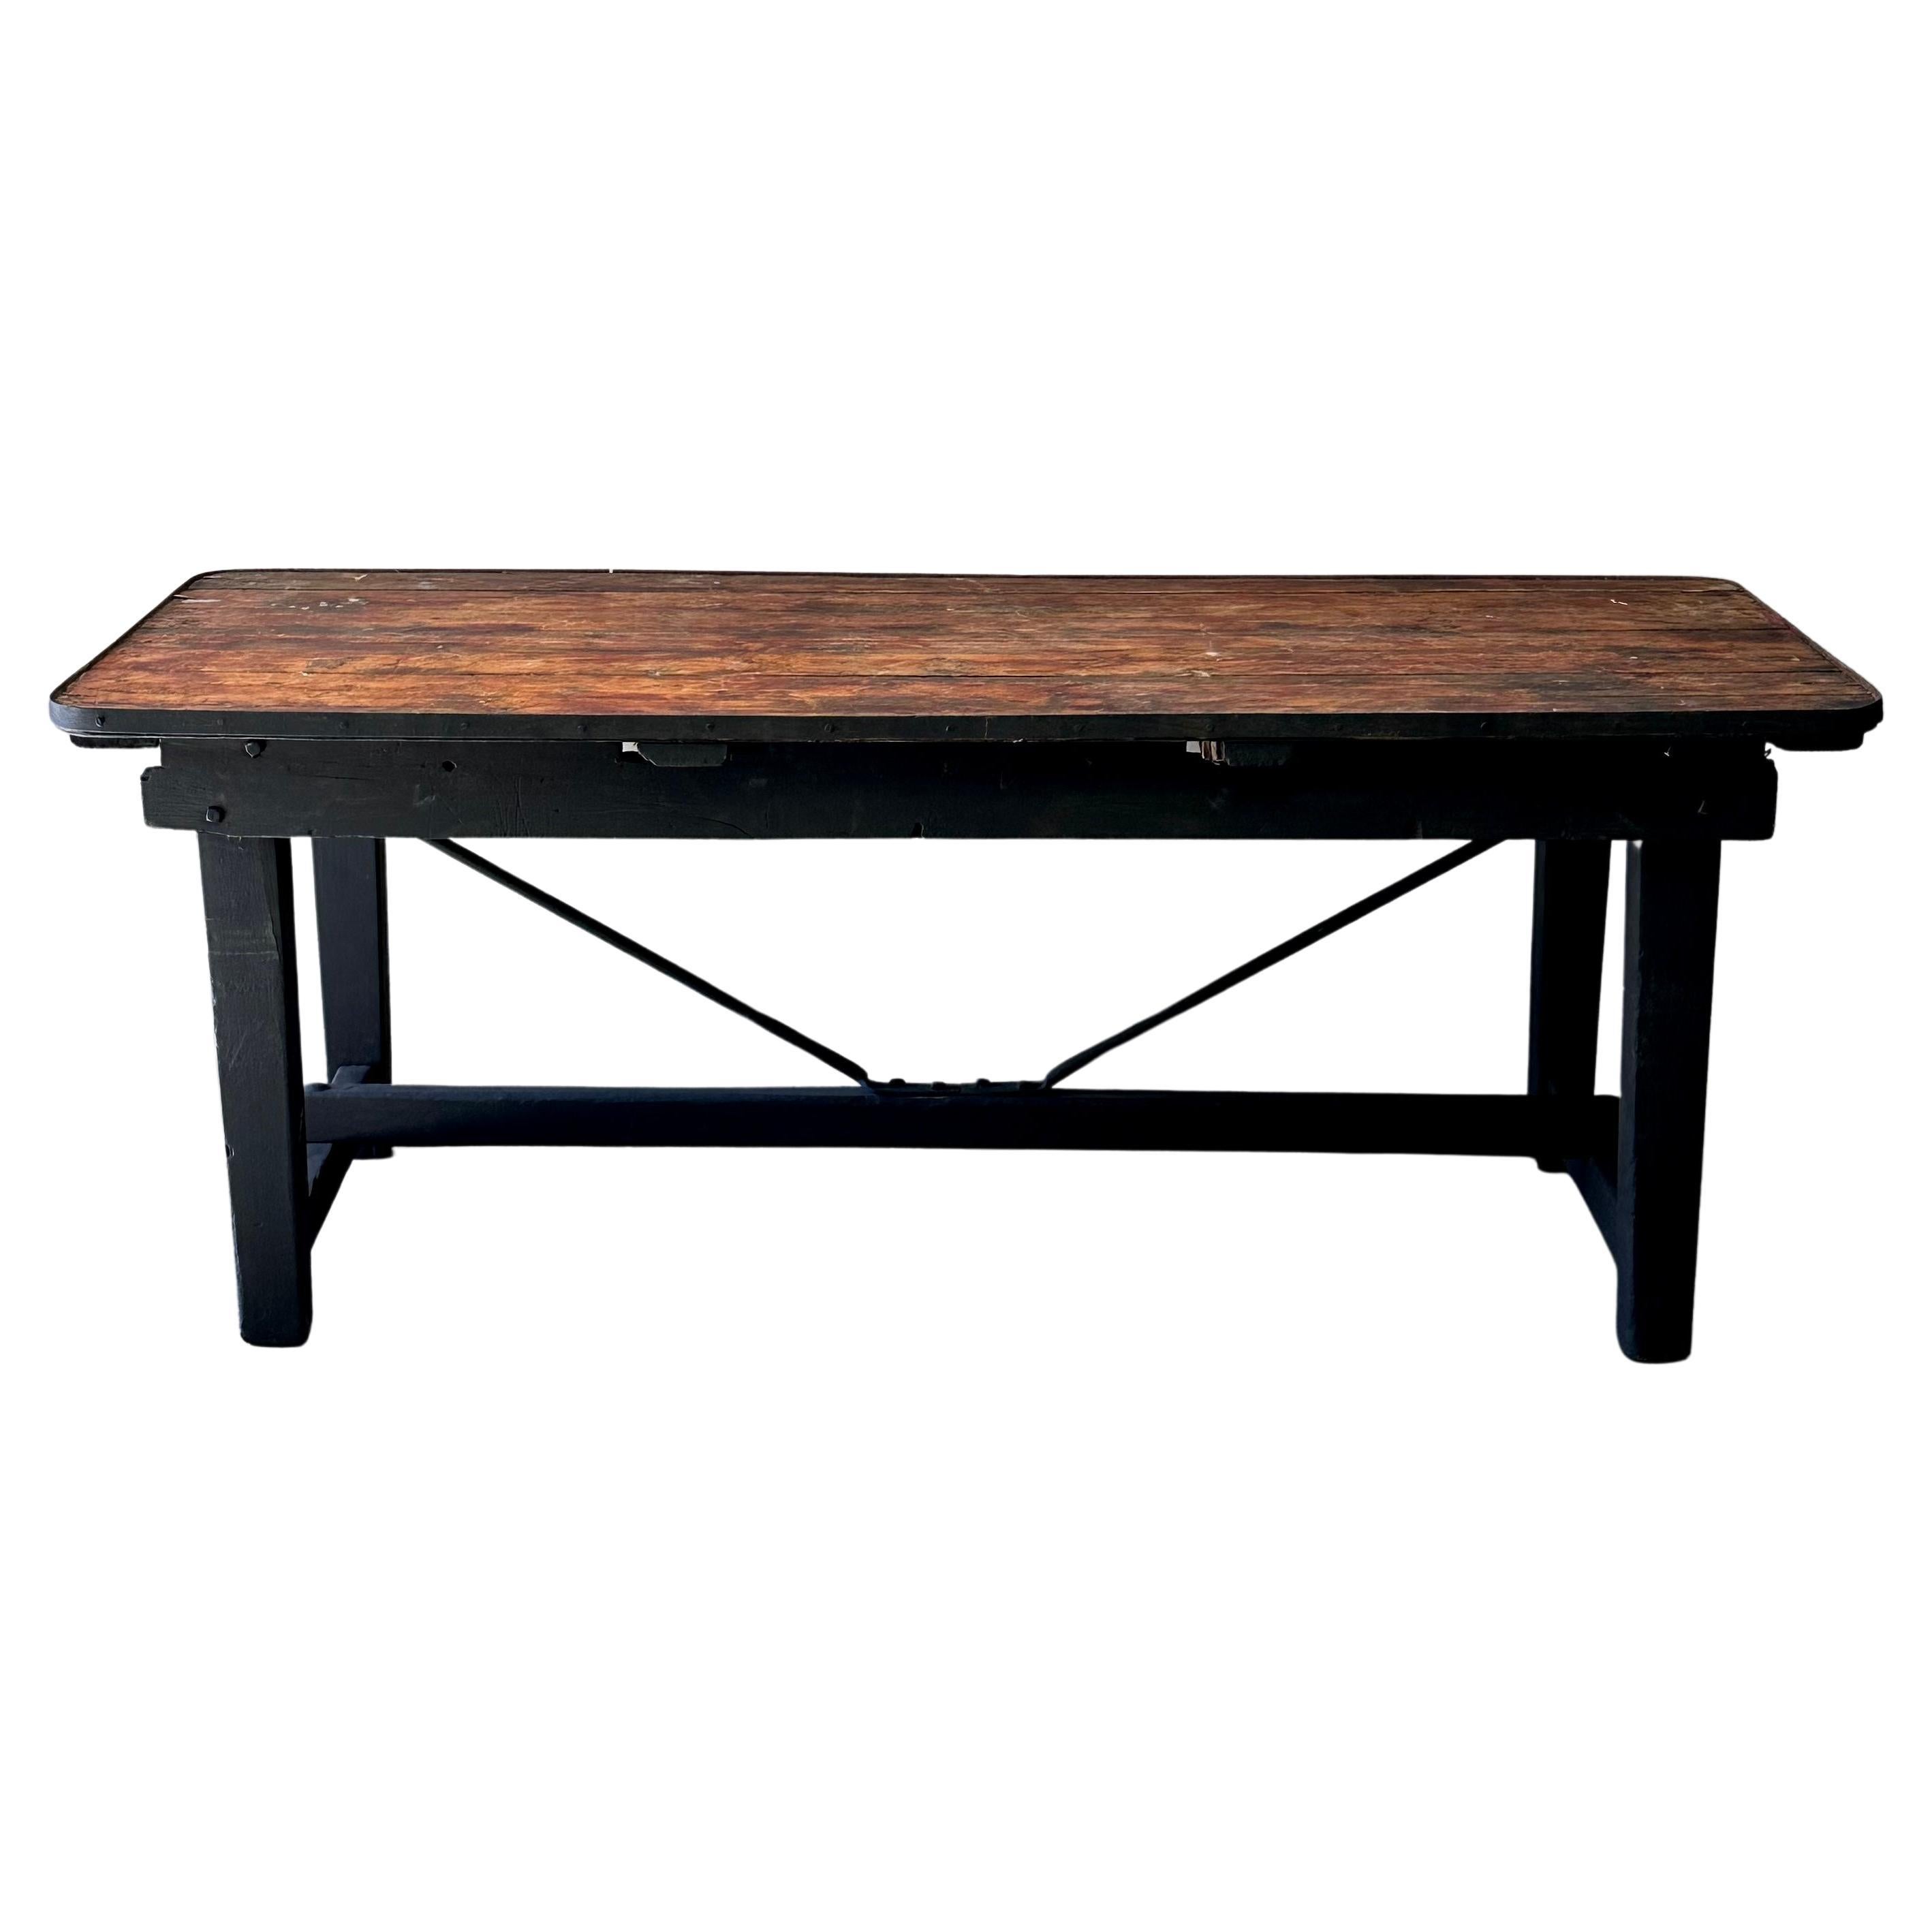 Early 20th Century Swedish Industrial Table